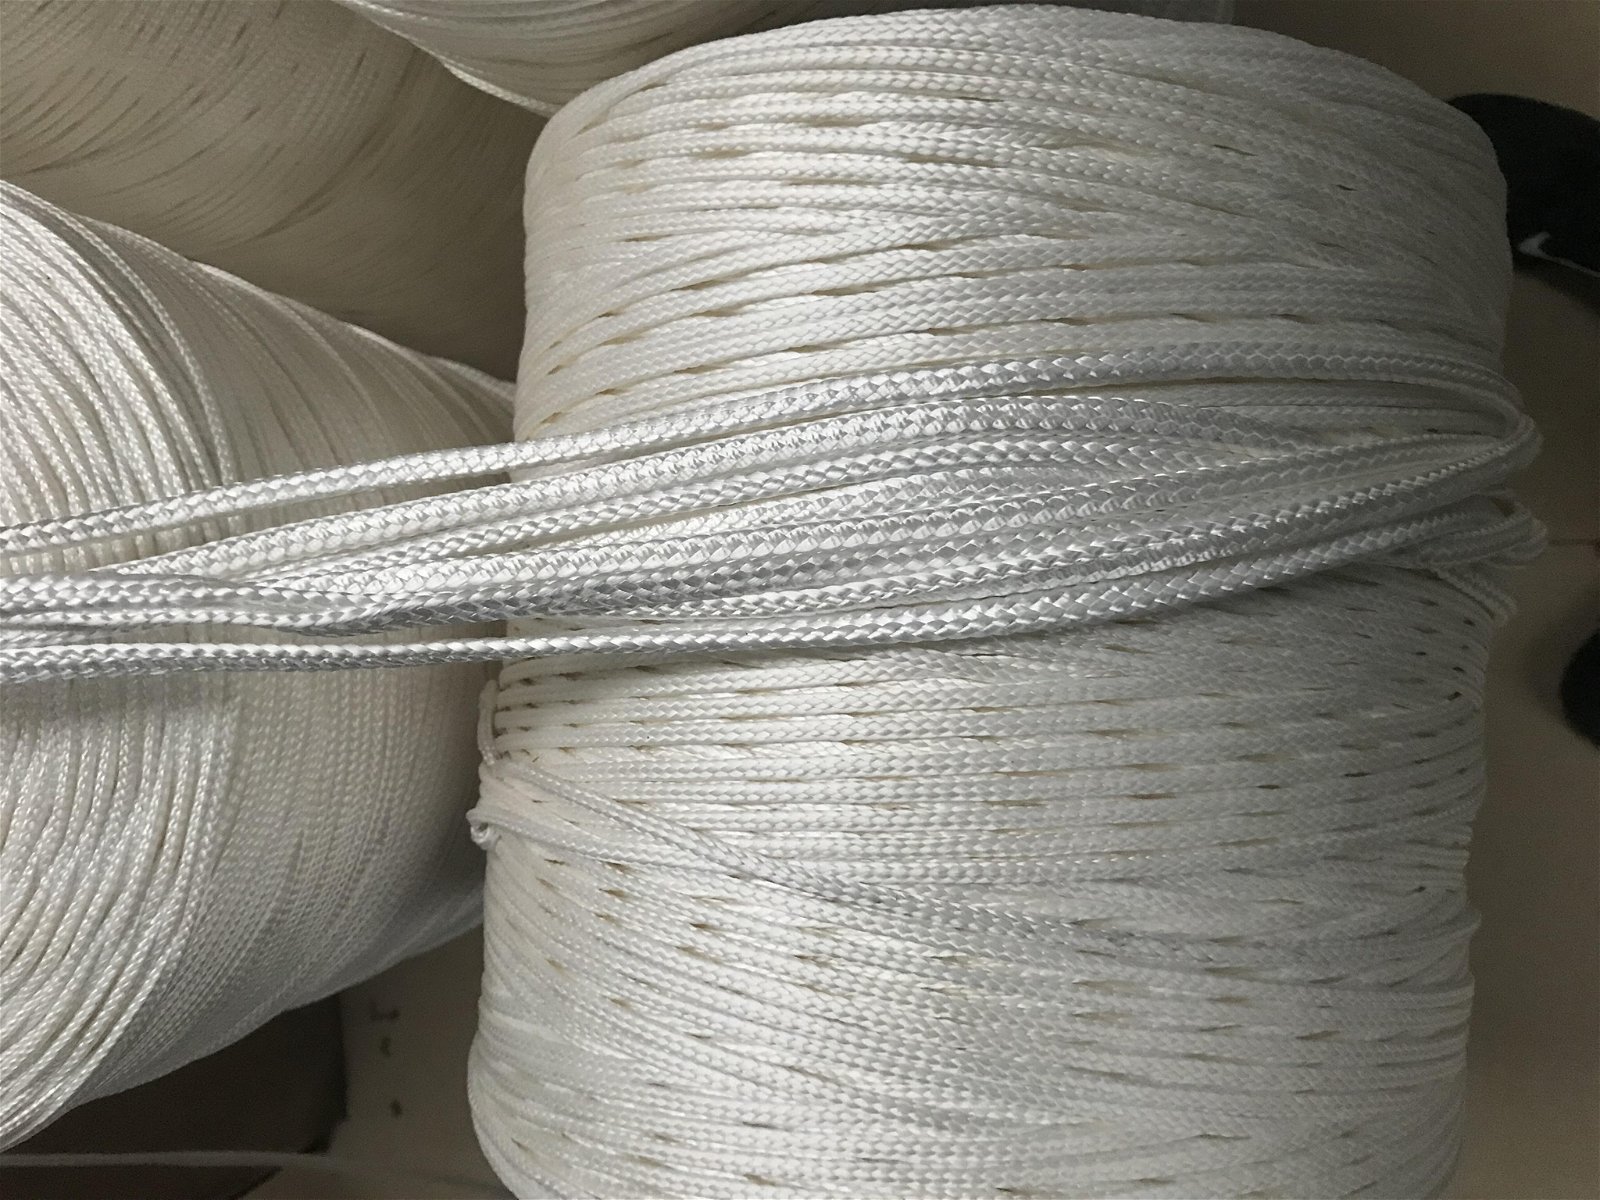 BRAIDED UHMWPE(DYNEEMA) KNOTTED NETTING 7